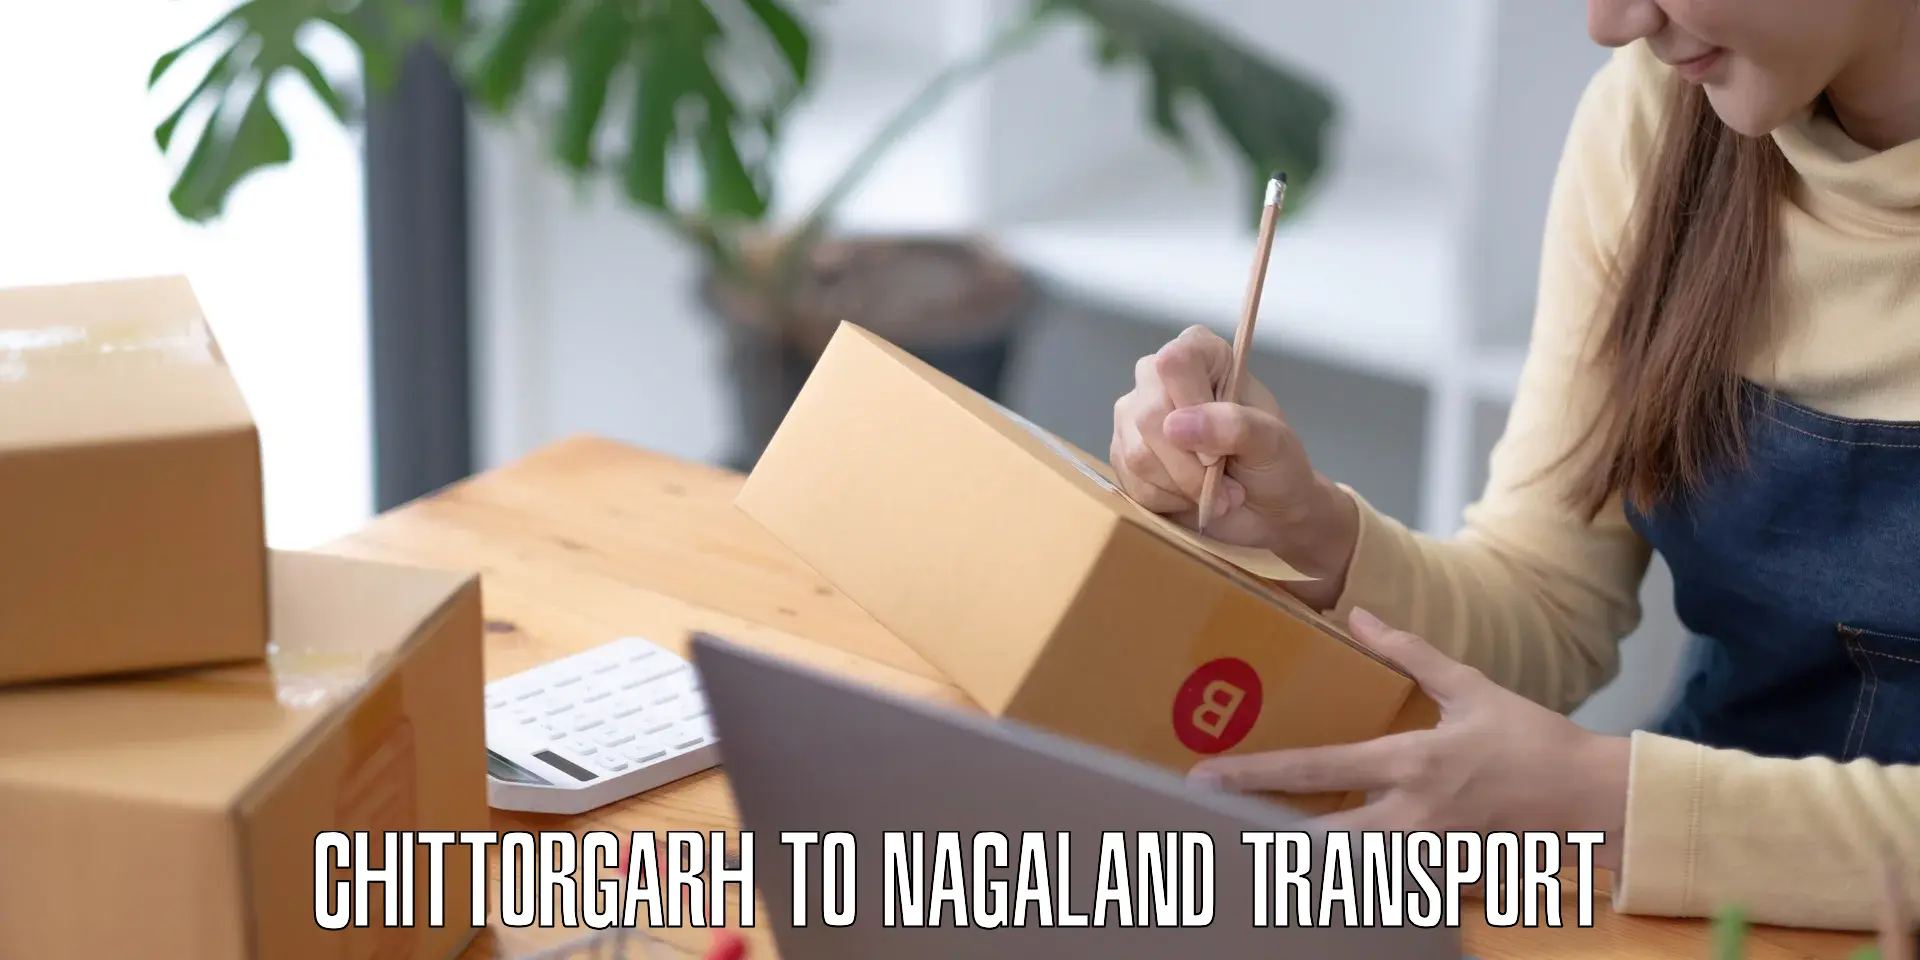 Package delivery services Chittorgarh to Nagaland